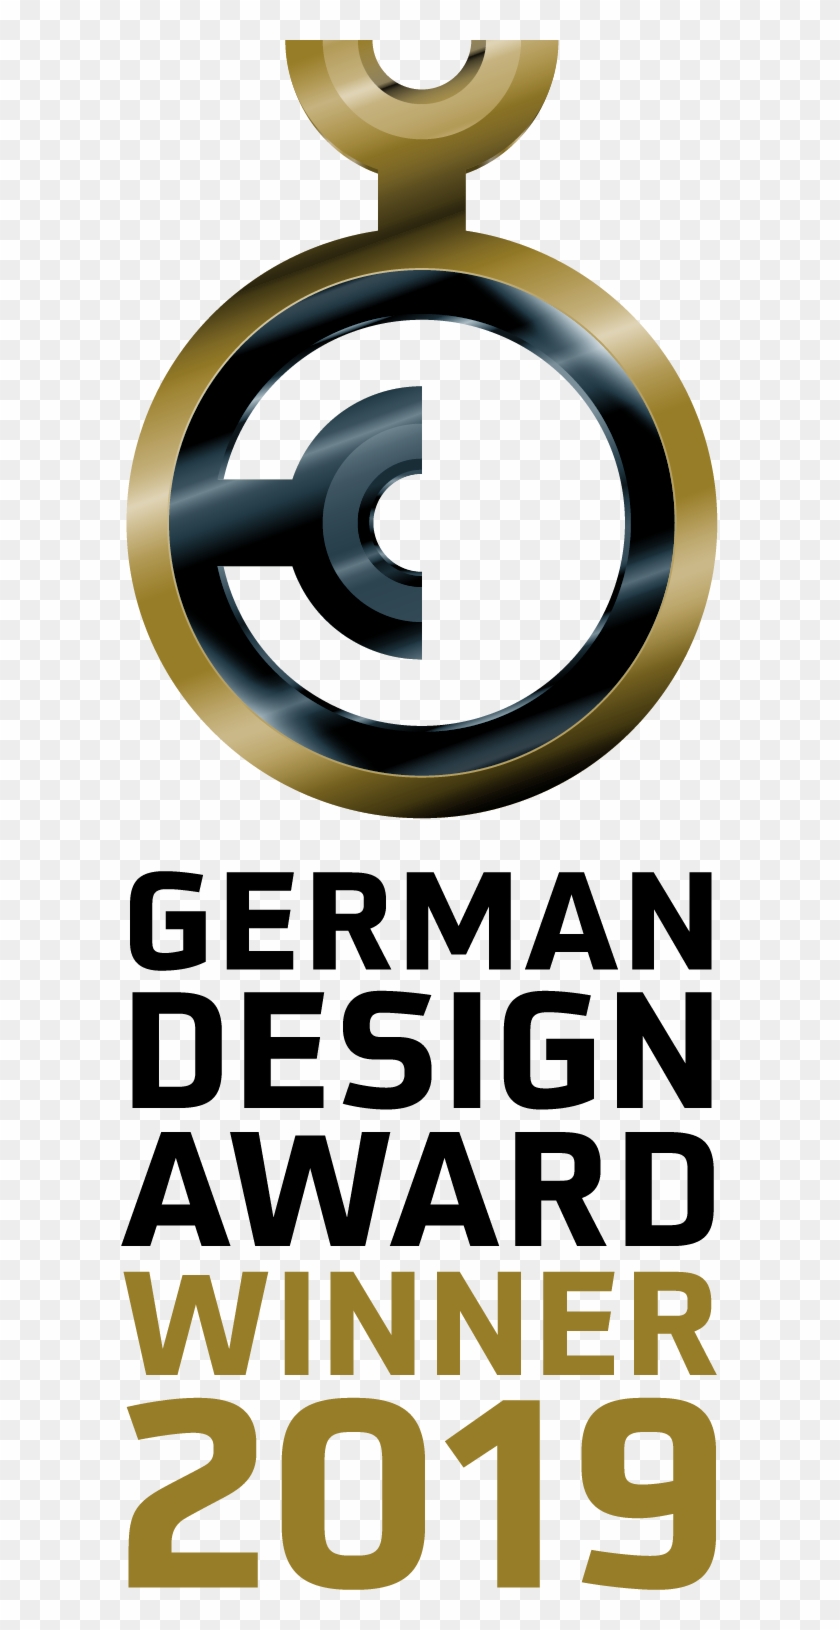 Img - German Design Award Special Mention 2018 Clipart #3277946